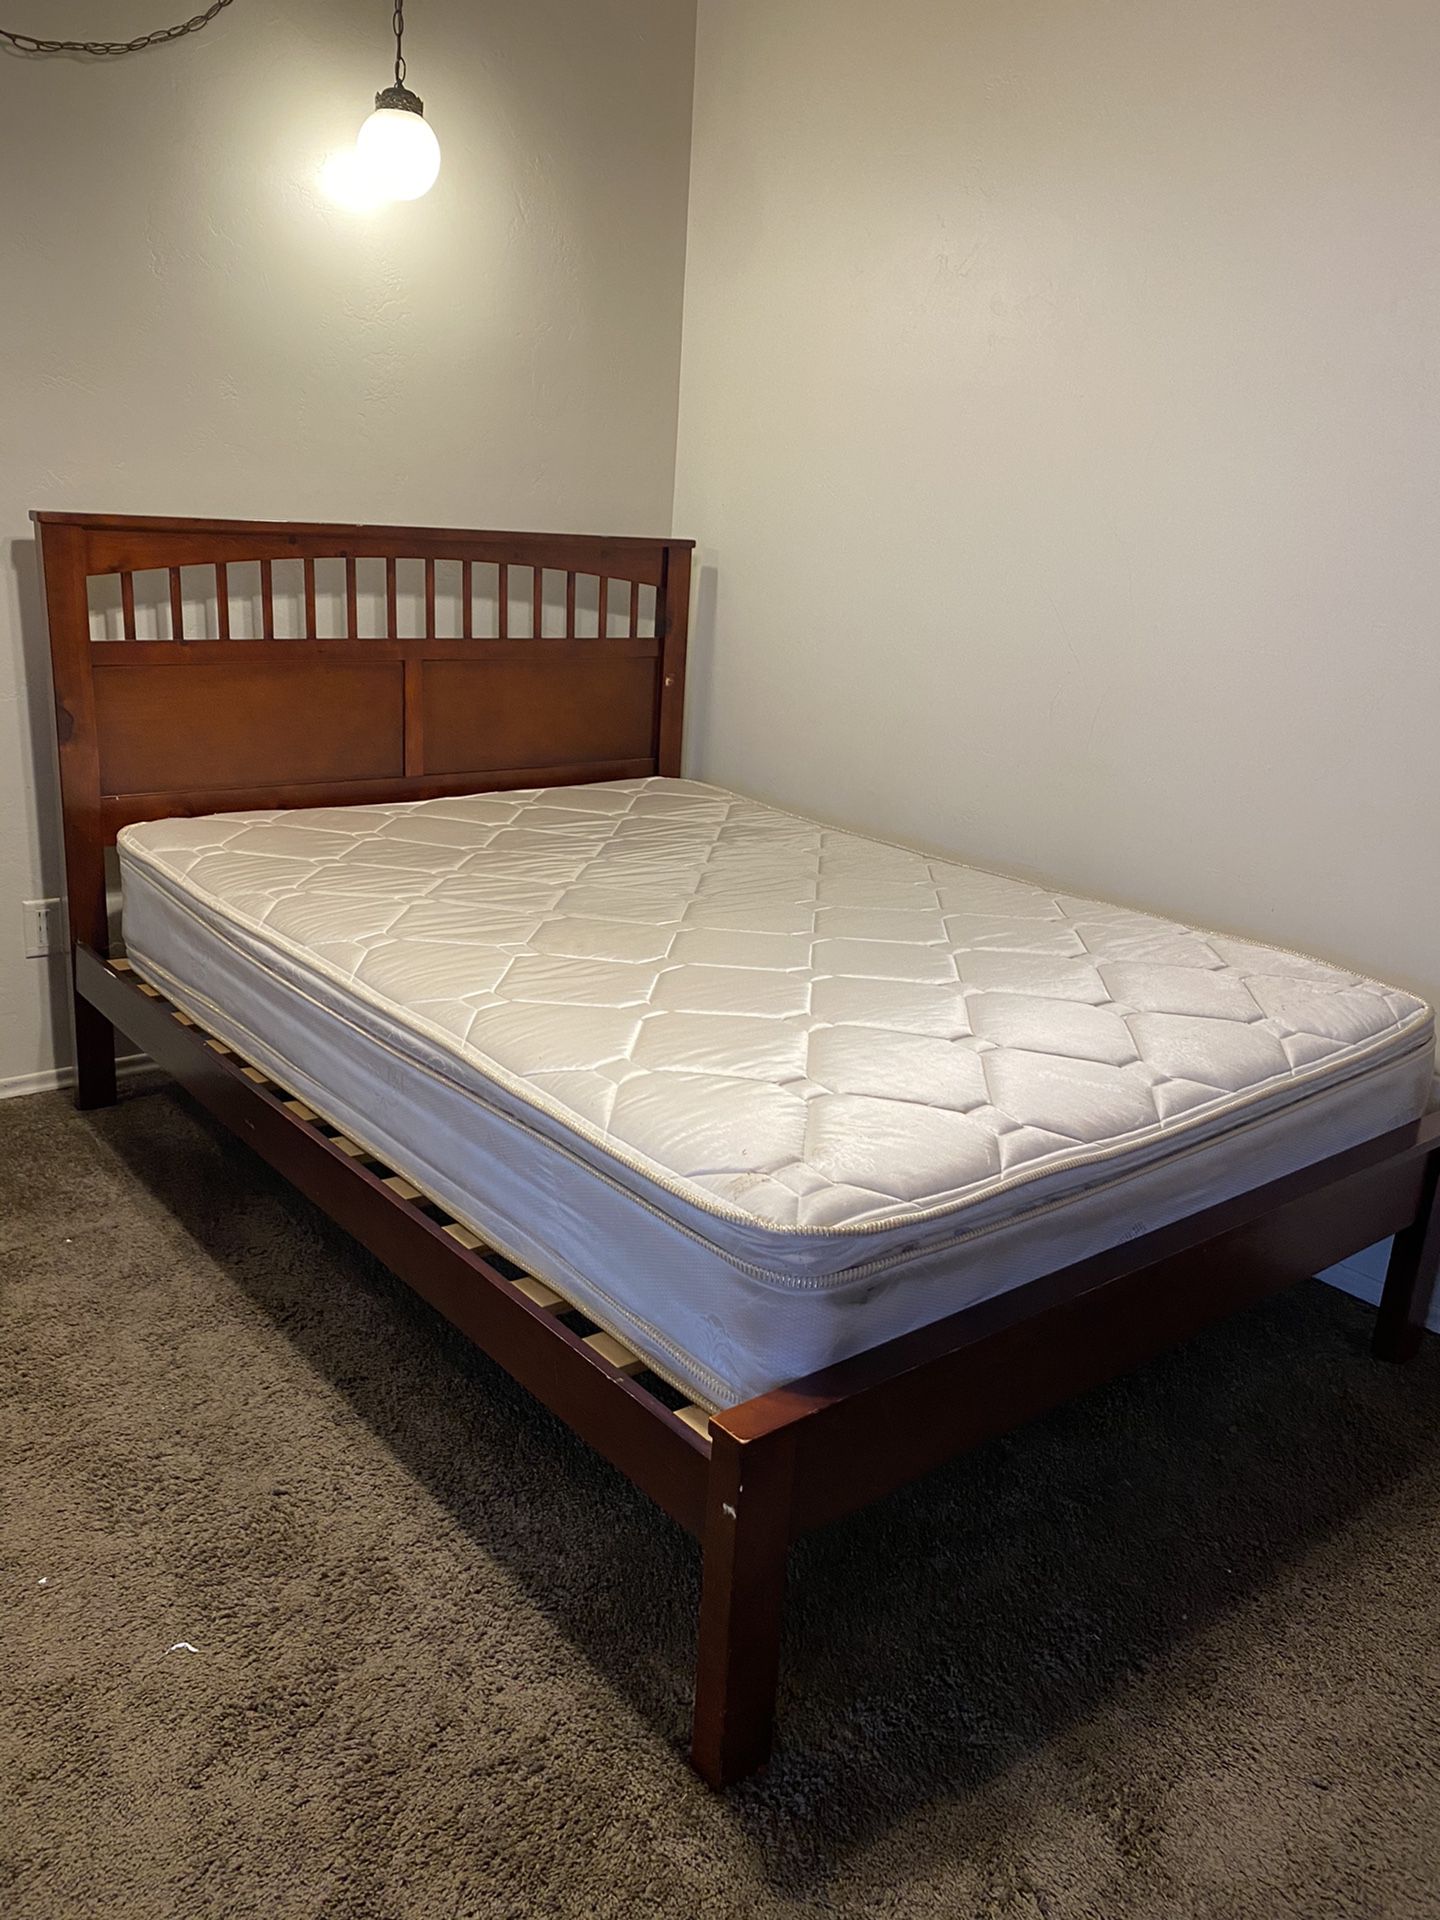 Full size bed frame and mattress